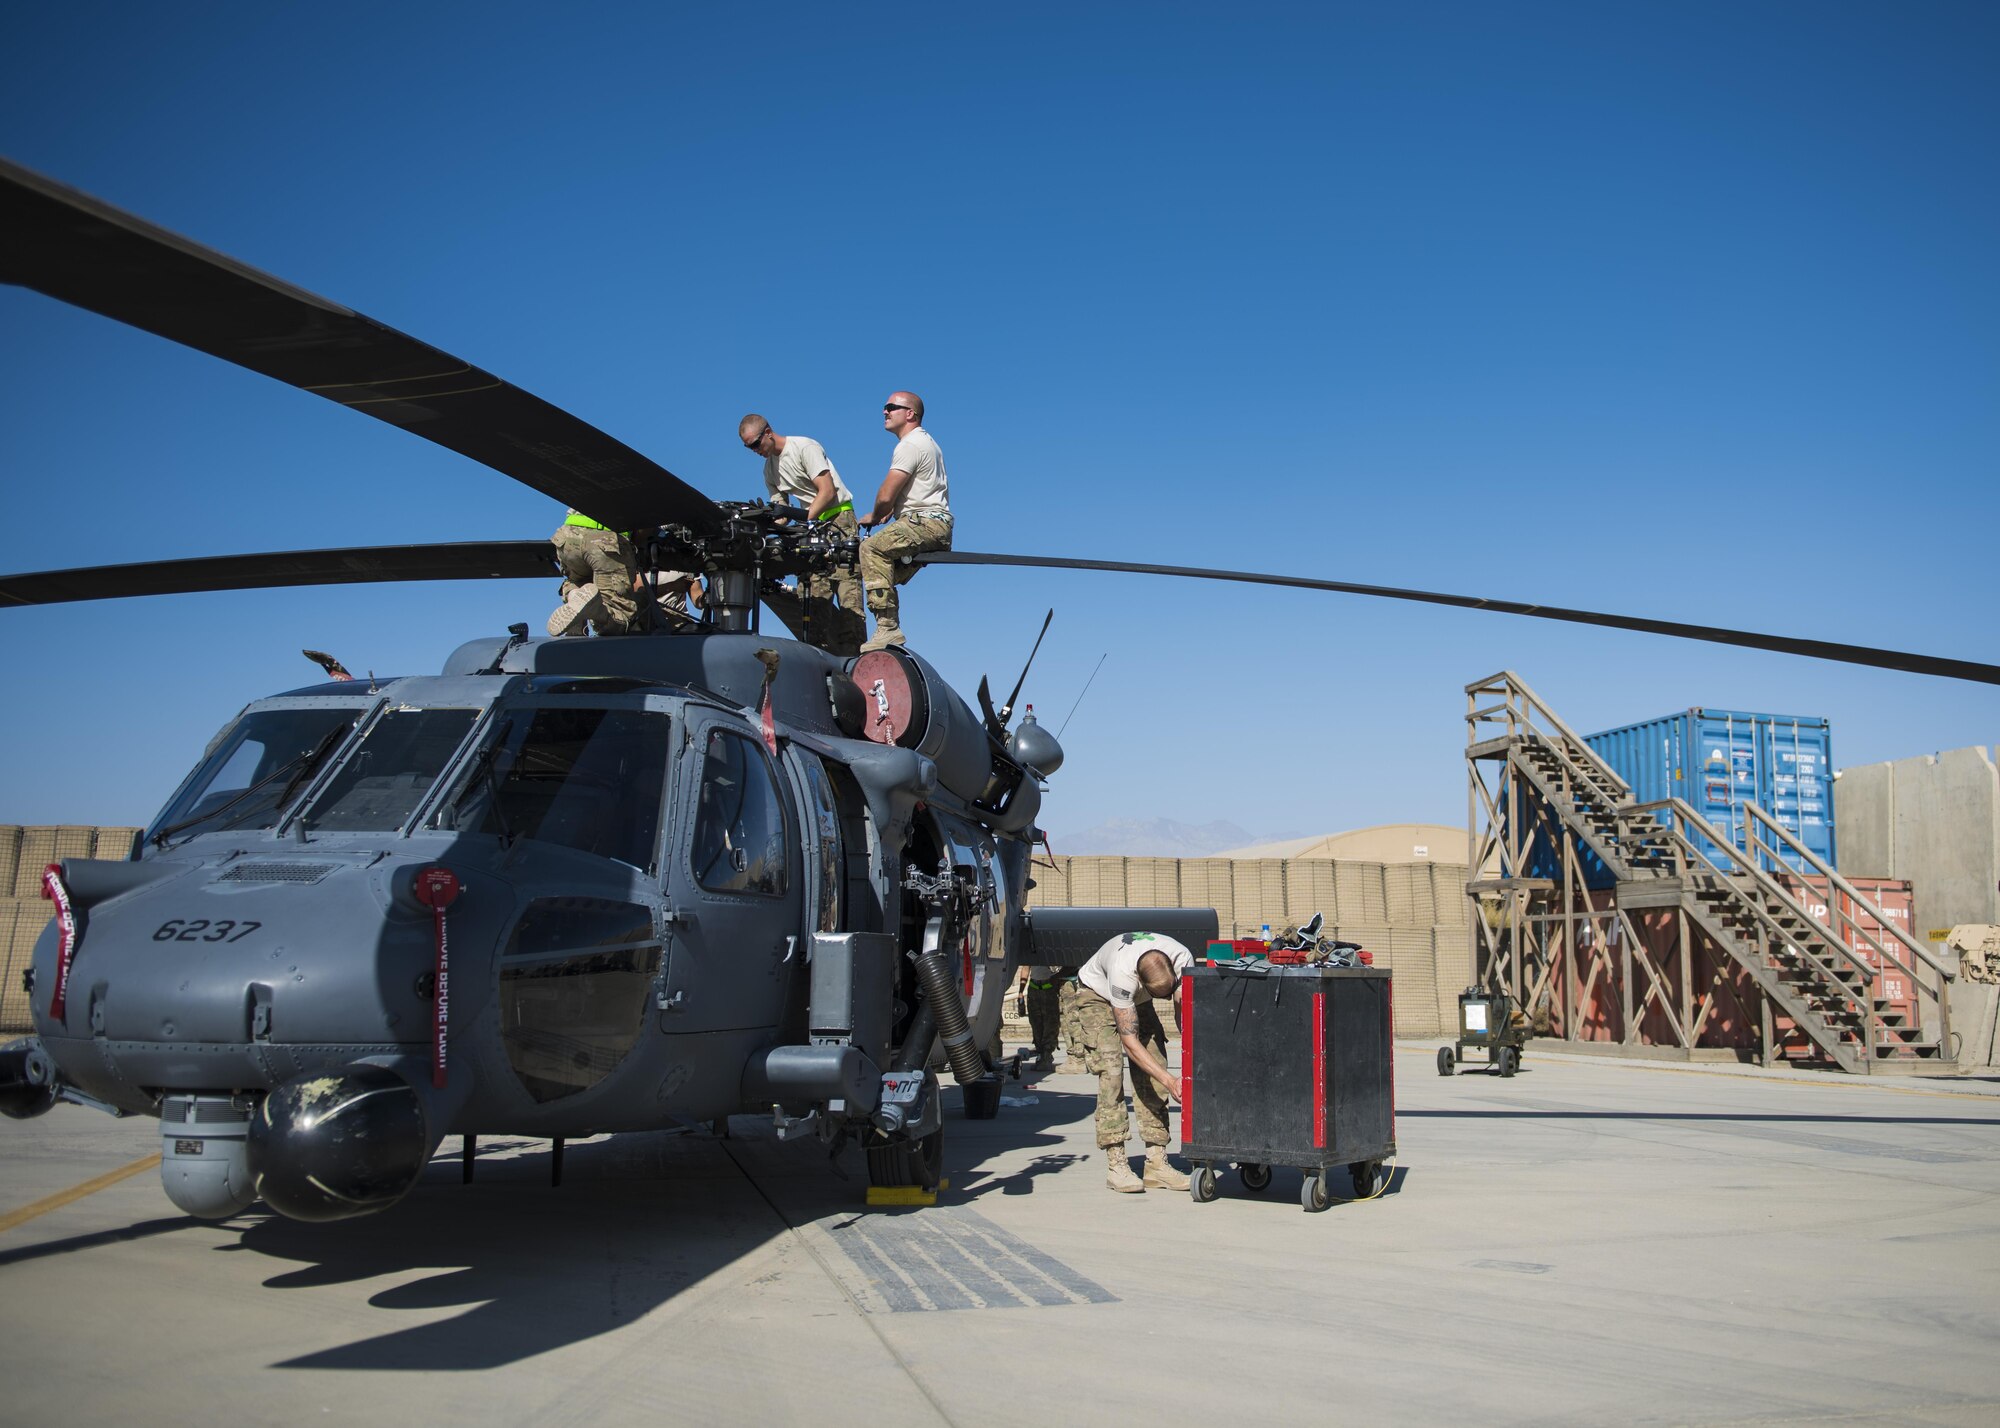 Airmen from the HH-60 Aircraft Maintenance Unit unfold the blades of a HH-60G Pave Hawk, Bagram Airfield, Afghanistan, Sept. 26, 2016. The 83rd ERQS provides the only U.S. personnel recovery assets in Afghanistan. HH-60G maintainers work a non-stop alert schedule and are ready to respond 24 hours a day, seven days a week. (U.S. Air Force photo by Senior Airman Justyn M. Freeman)